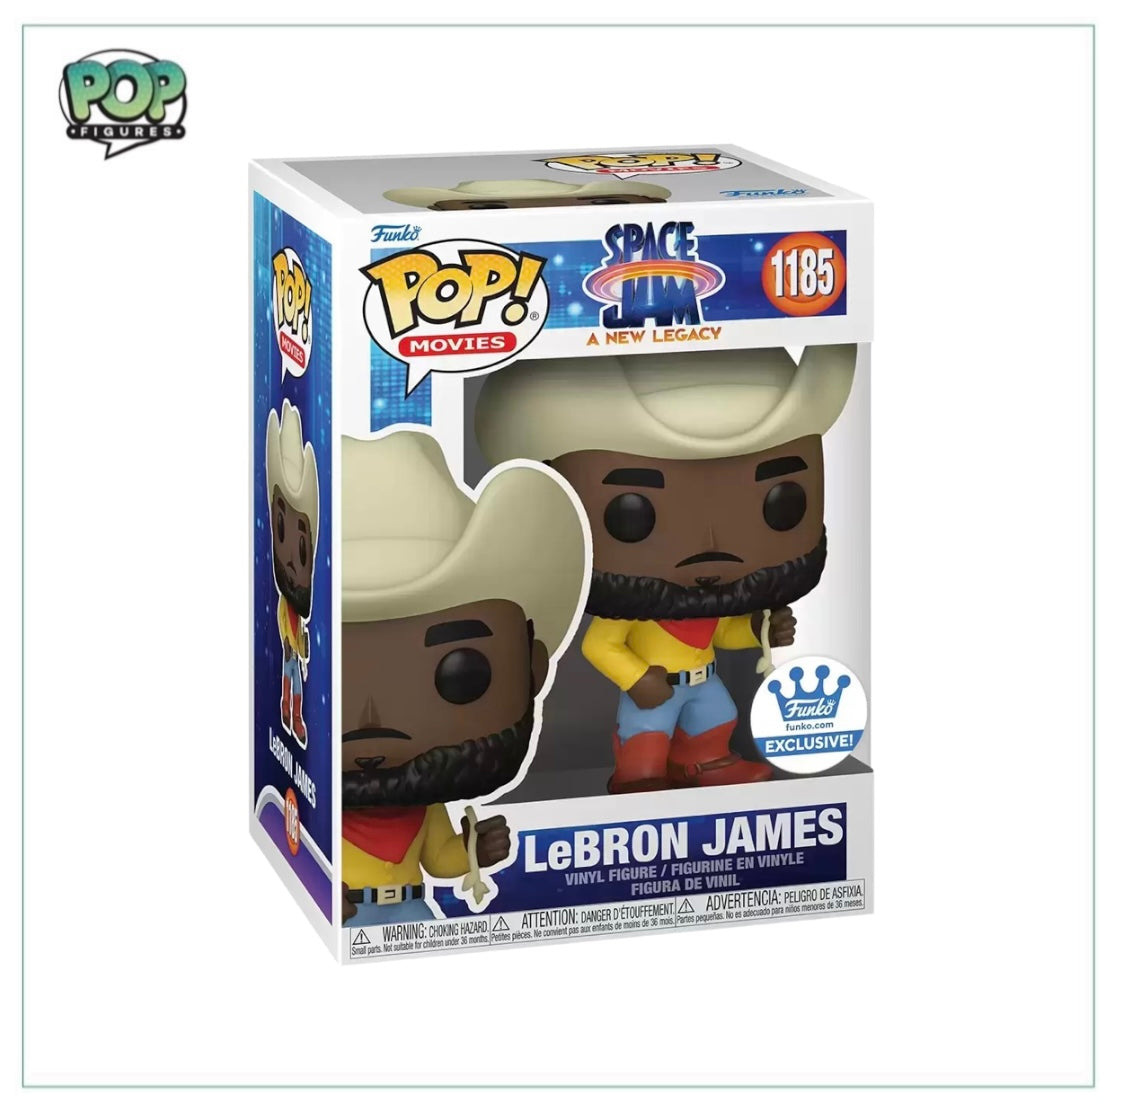 LeBron James #1185 Funko Pop! - Space Jam A New Legacy - Funko Shop Exclusive - Angry Cat